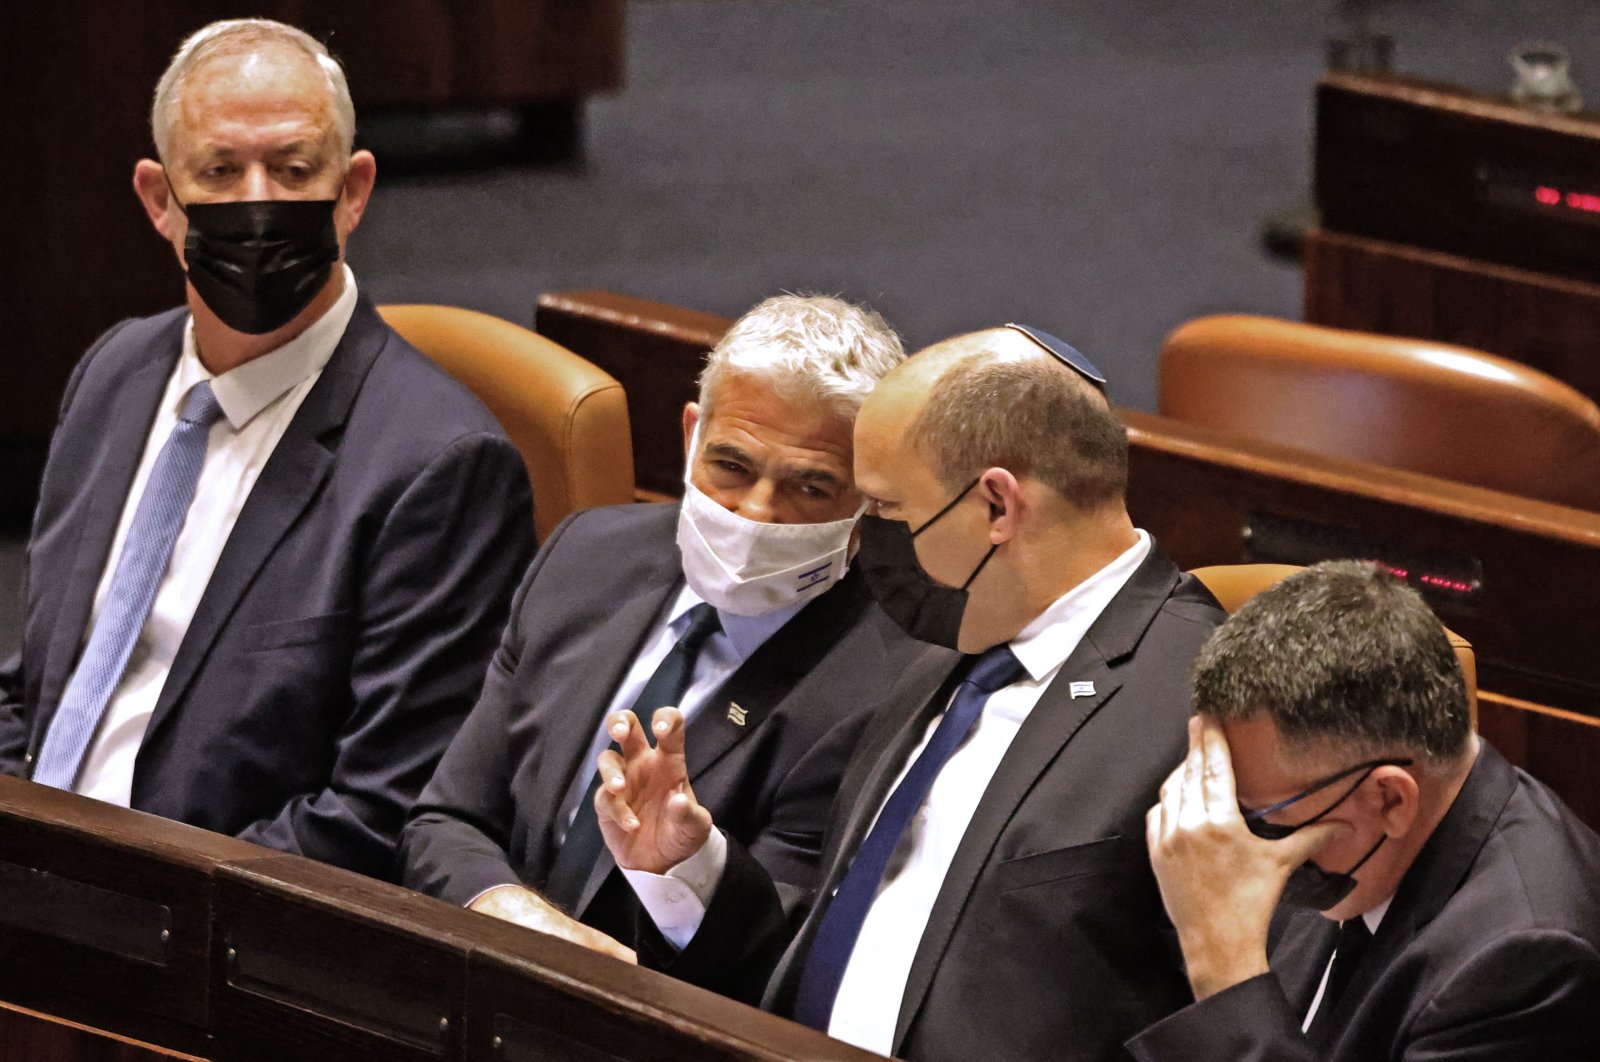 (L to R) Israeli Defense Minister Benny Gantz, Foreign Minister Yair Lapid, Prime Minister Naftali Bennett and Justice Minister Gideon Saar attend a plenum session in the presence of the speaker of the United States House of Representatives in the Knesset (Israeli Parliament), in West Jerusalem, Israel, Feb. 16, 2022. (AFP Photo)